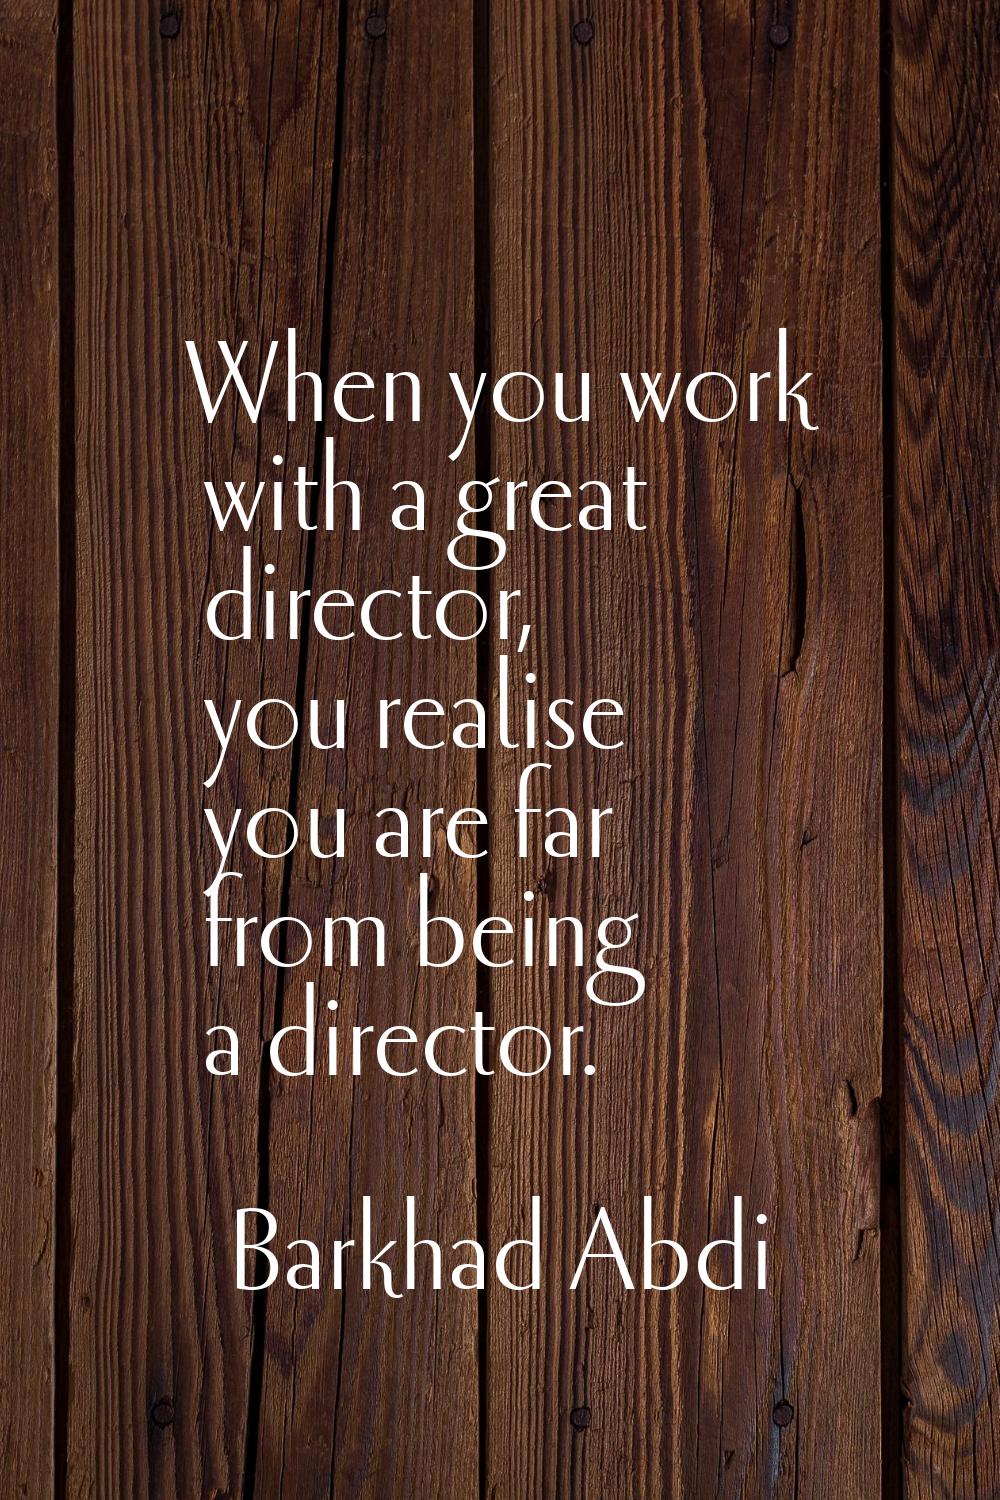 When you work with a great director, you realise you are far from being a director.